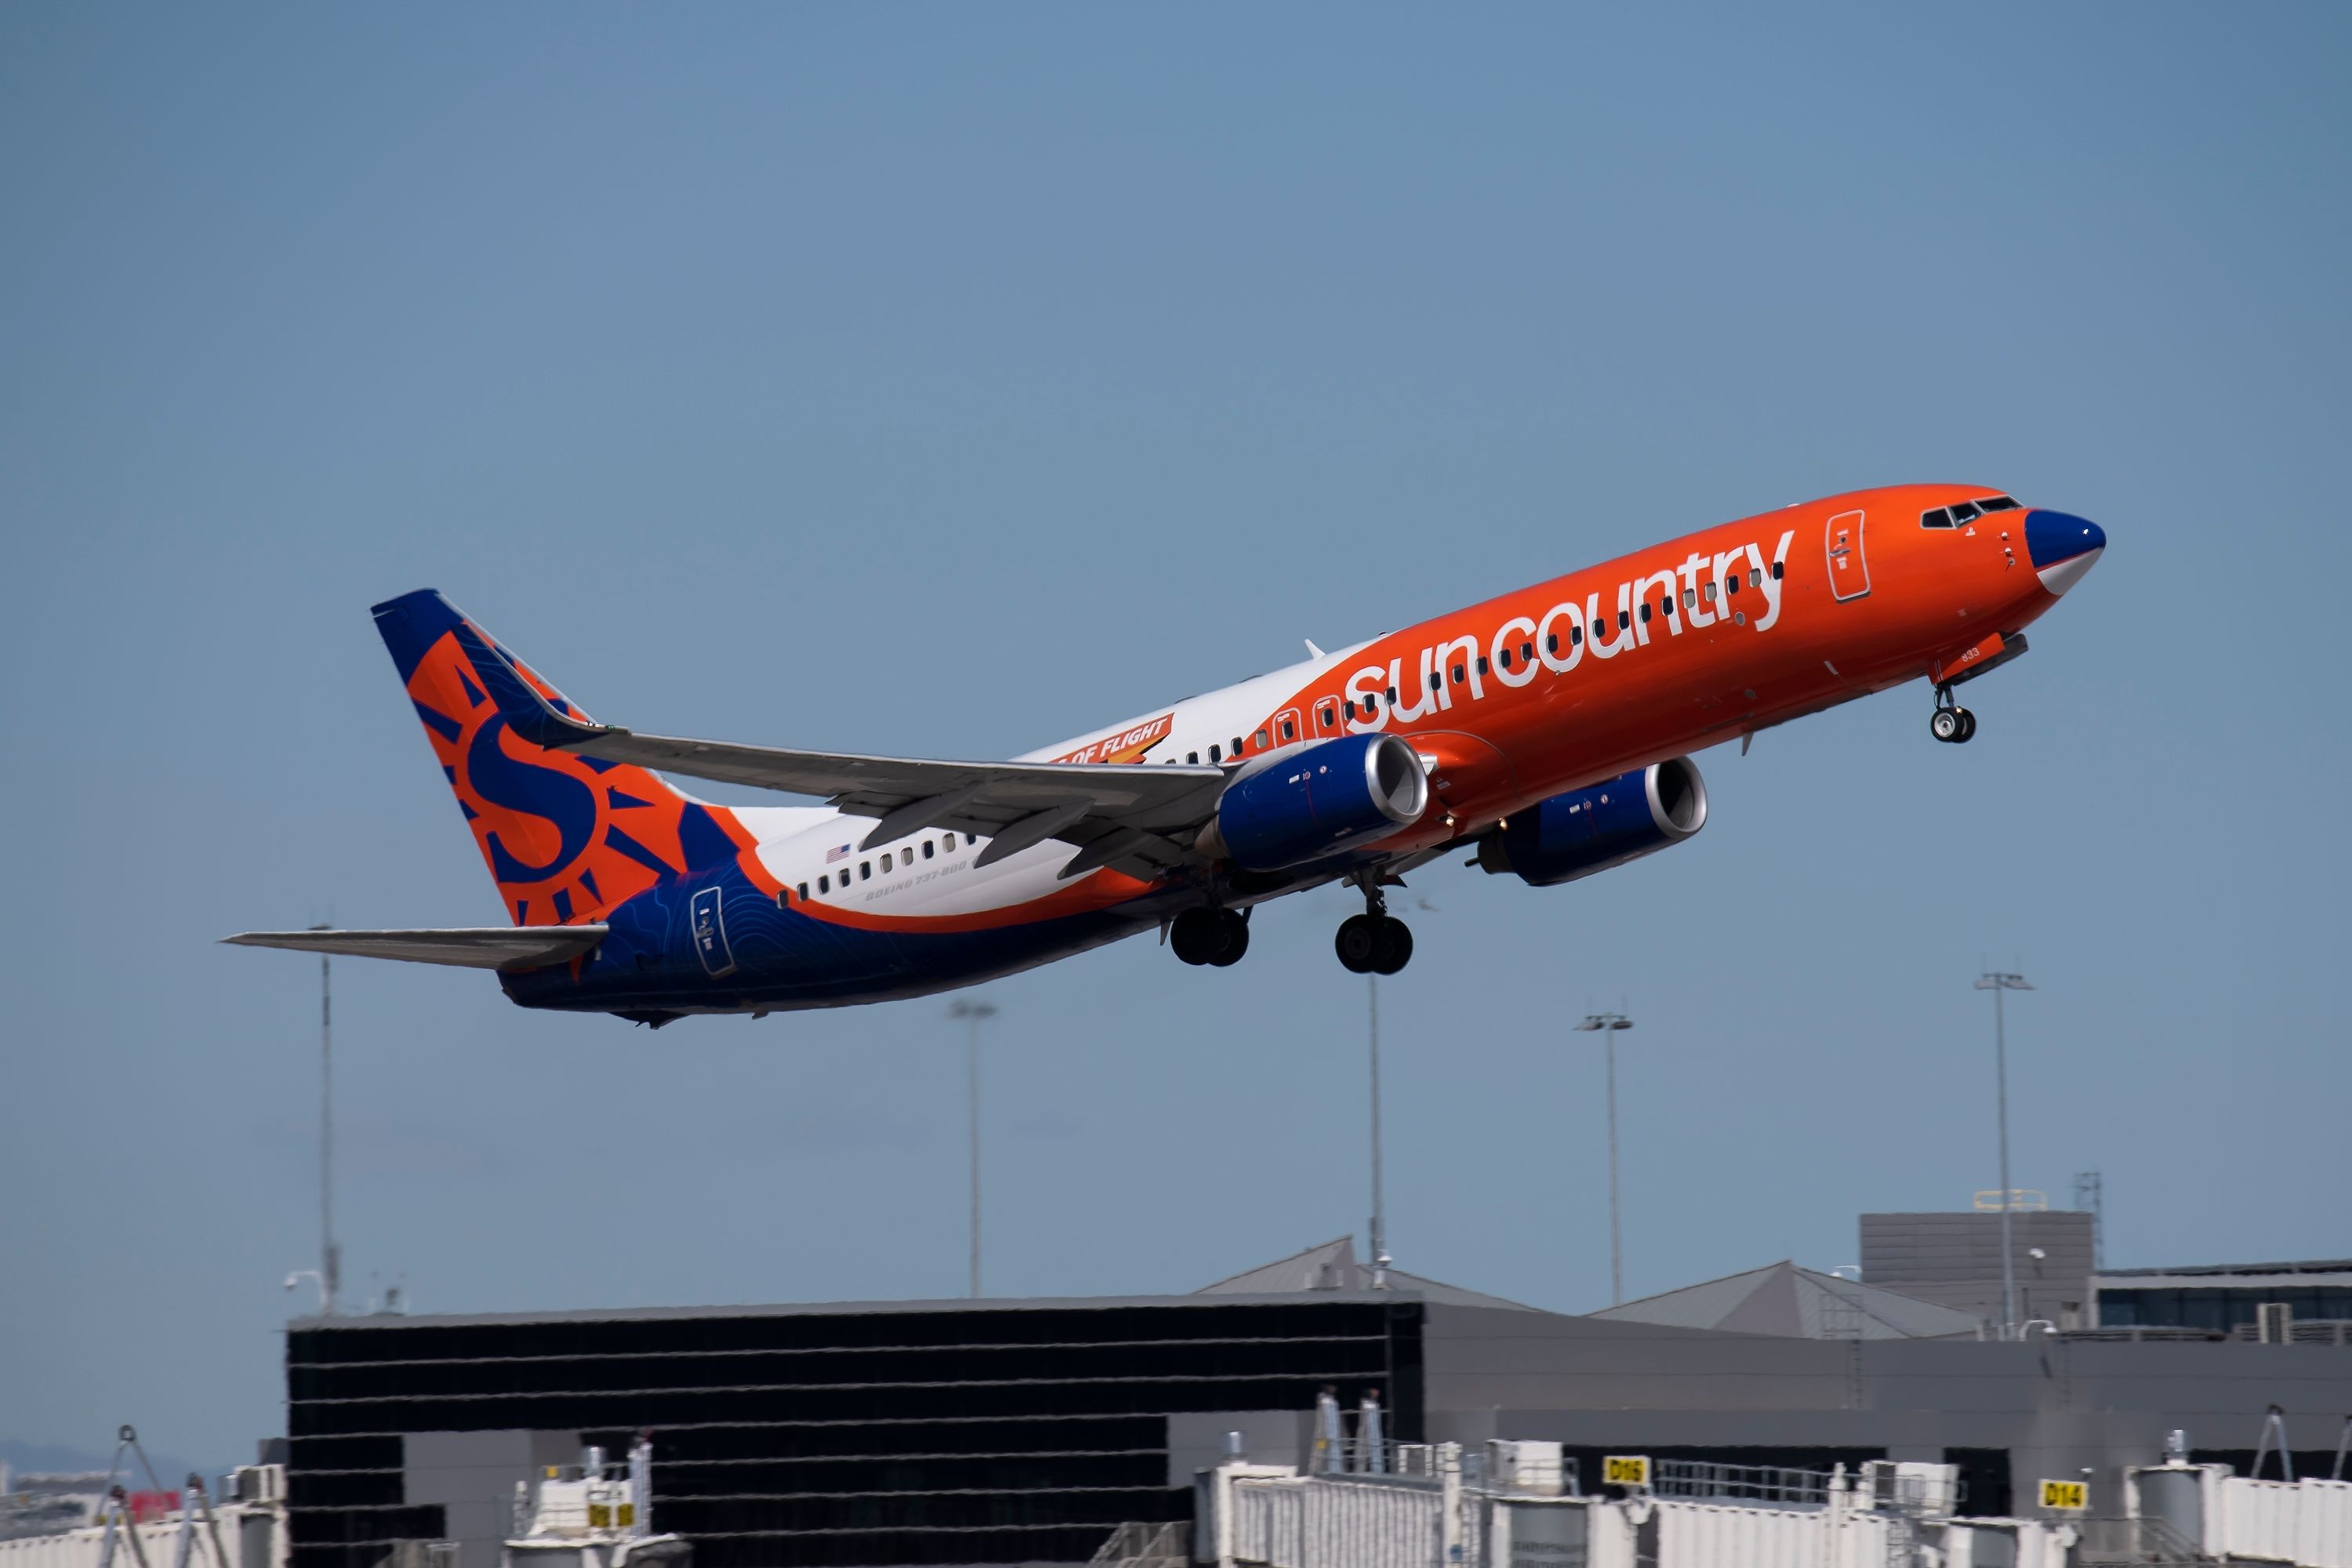 A Sun Country Boeing 737-800 departing from Phoenix 